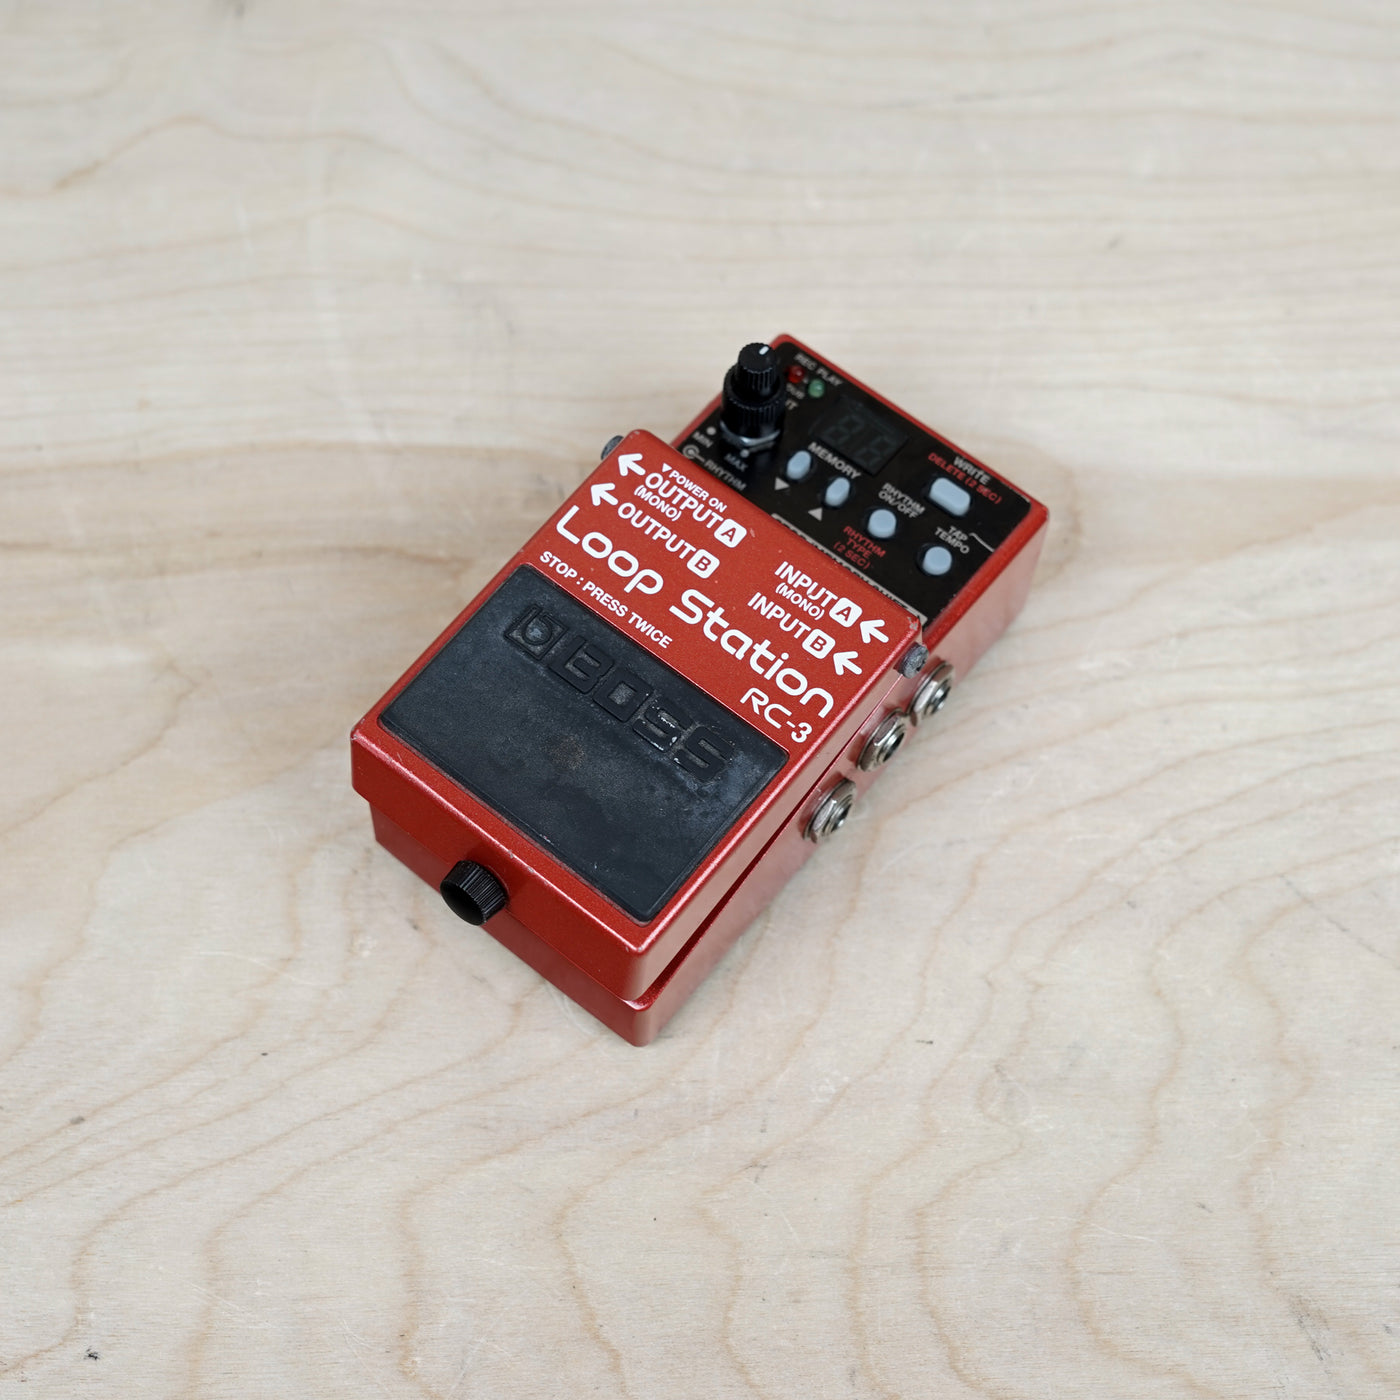 Boss Loop Station RC-3 (Red Label) – A Flash Flood of Gear